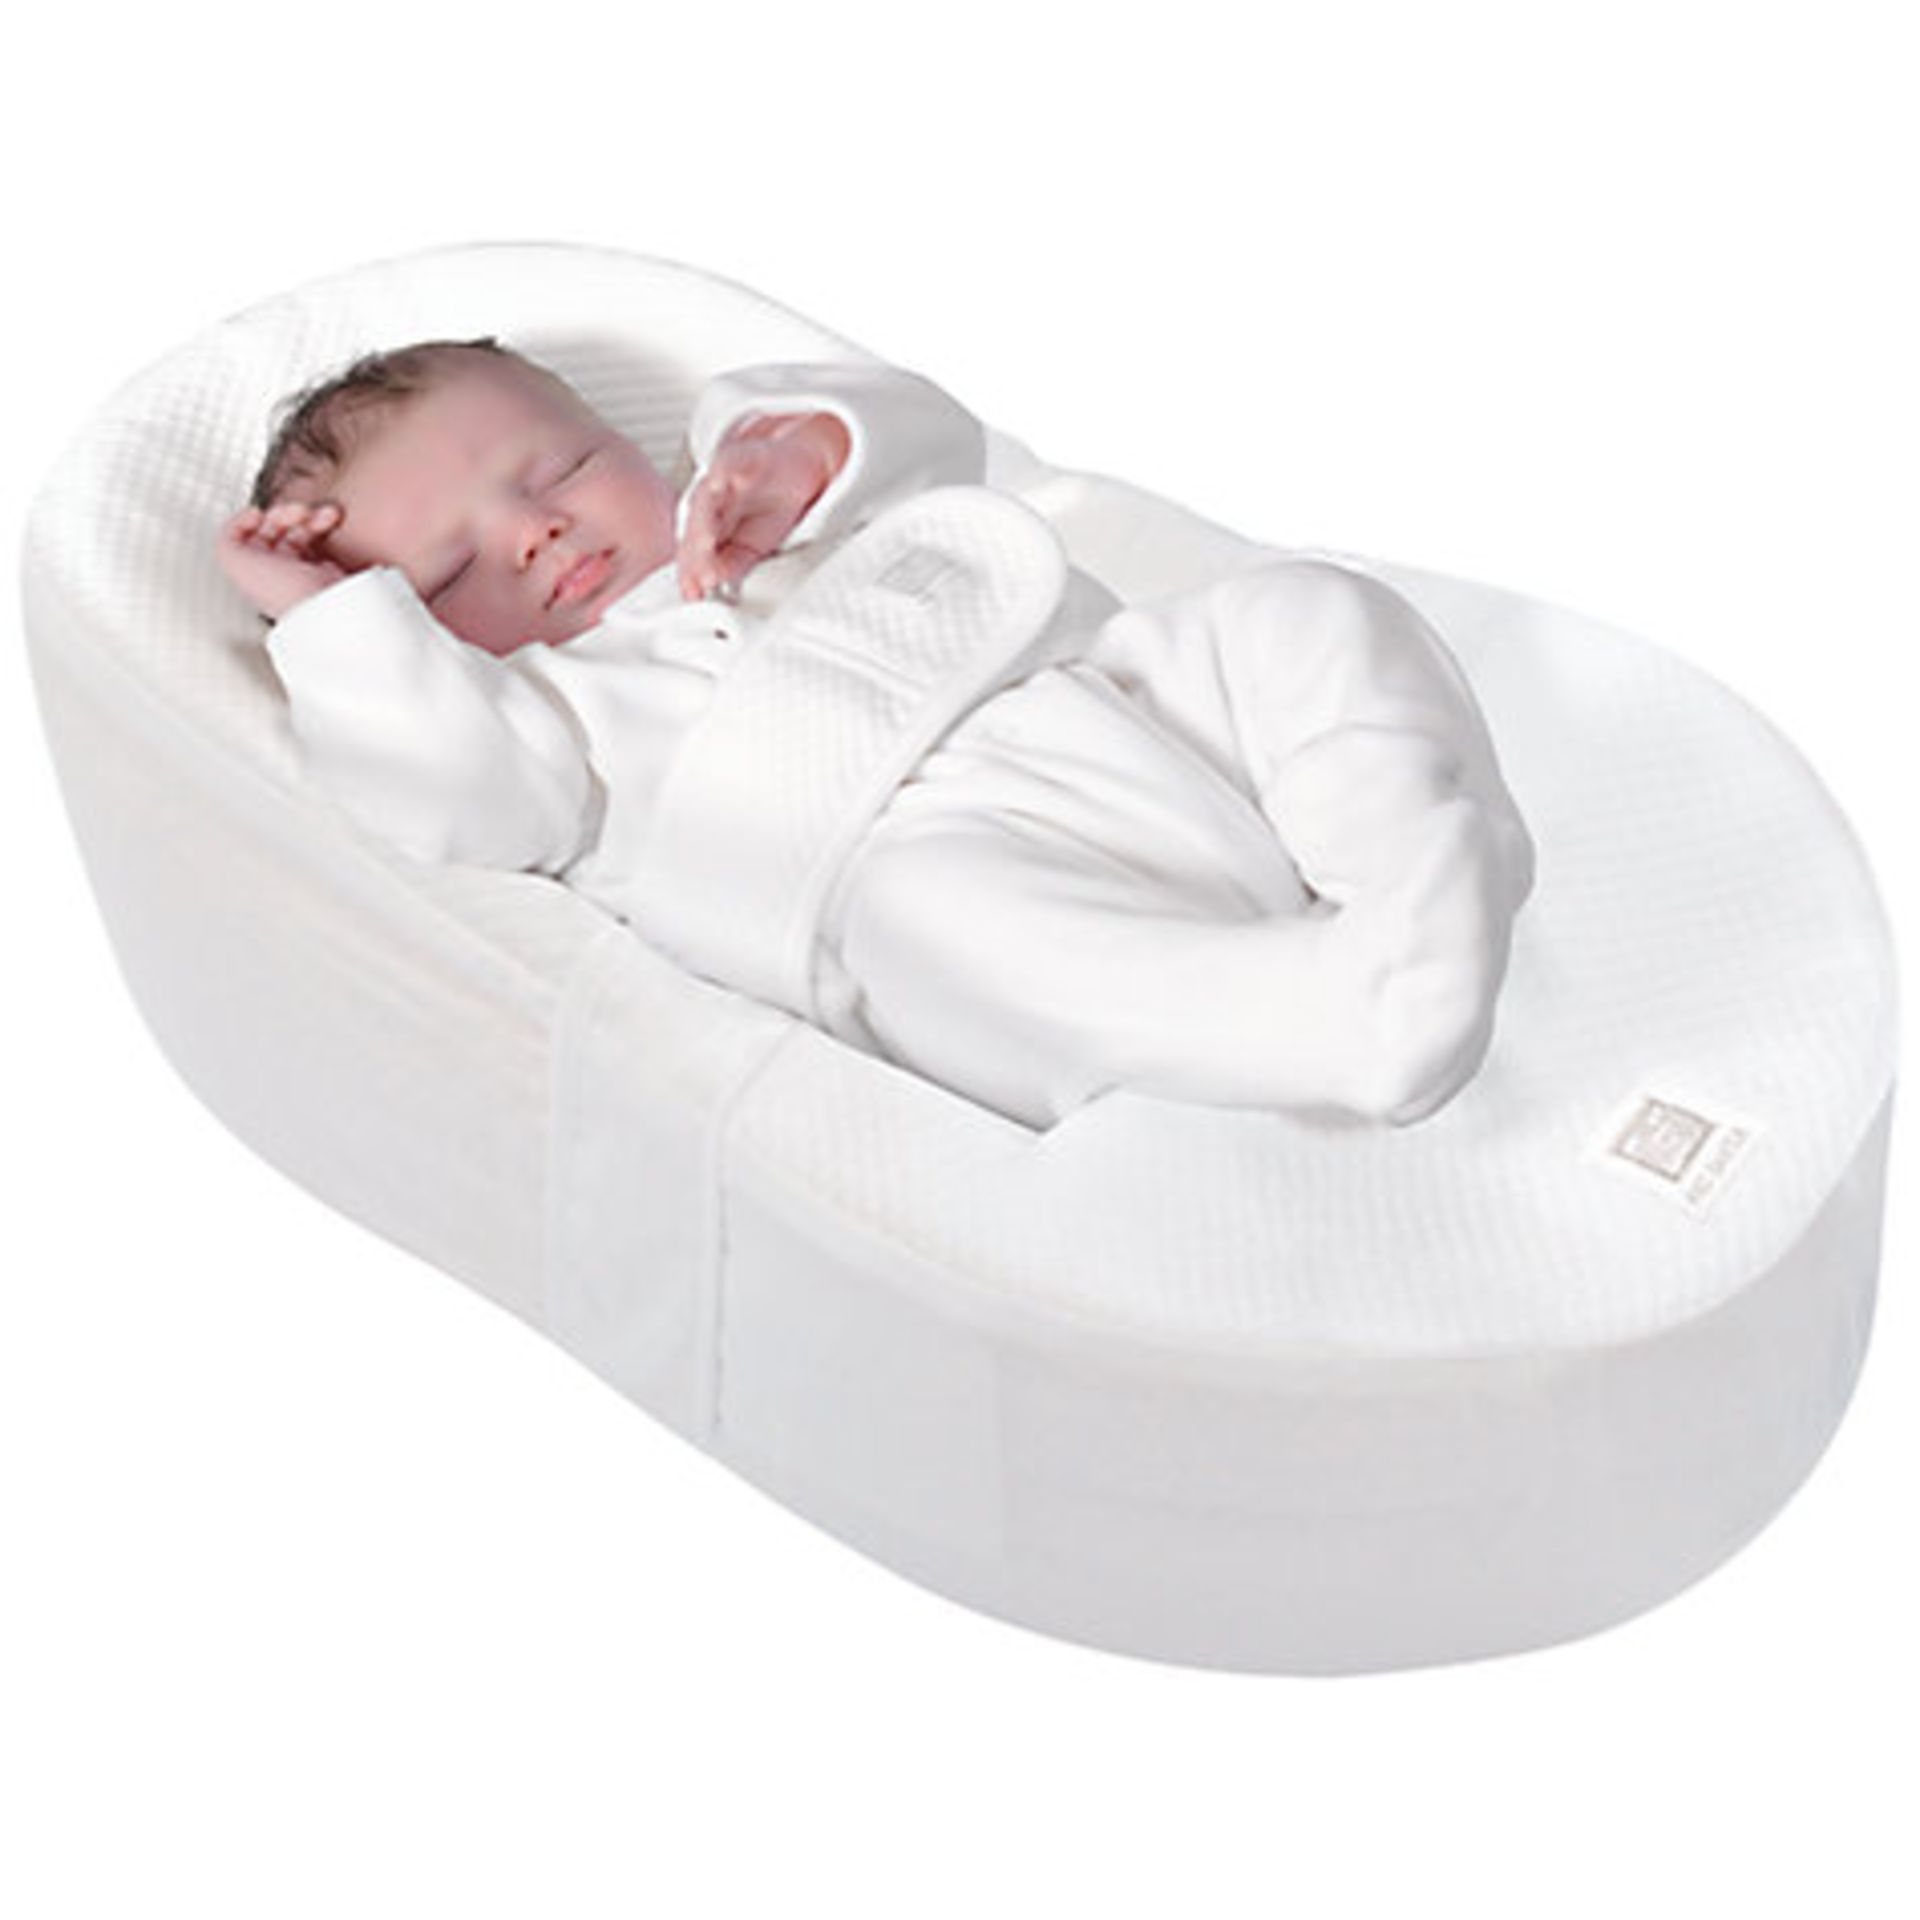 BOXED RED CASTLE COCOON BABY MATTRESS RRP £130.00 22/09/15 - Image 2 of 2